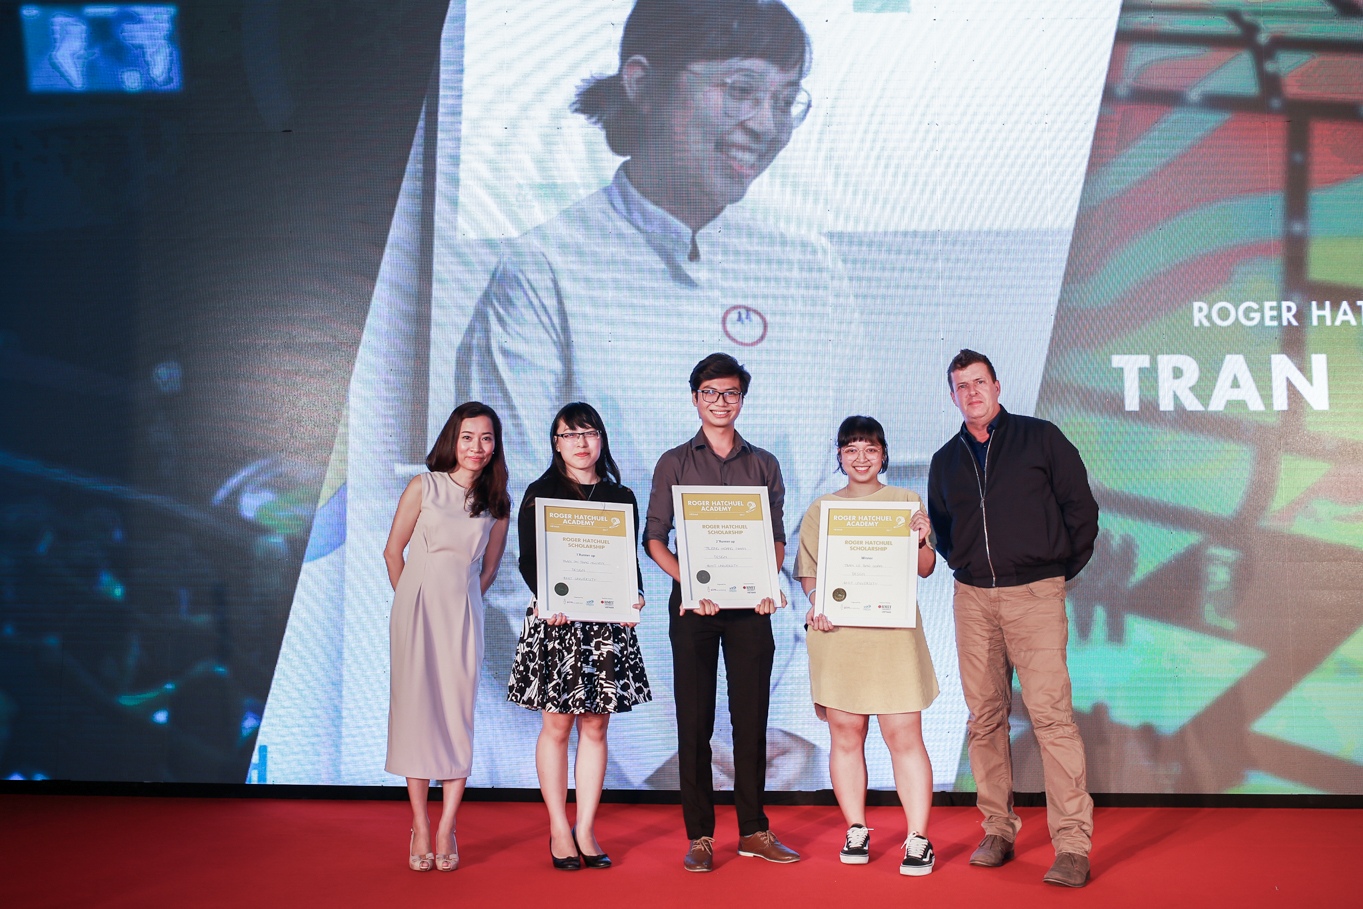 Tran Le Bao Quan (second from right) received the Roger Hatchuel Academy scholarship at the Vietnam Young Lions 2017 Award Ceremony. From left to right: Pham Dieu Anh (Managing Director of AIM Academy), Tran Thi Thao Nguyen (scholarship finalist), Truong Hoang Nhan (scholarship finalist), Tran Le Bao Quan (Roger Hatchuel scholarship winner), Professor Rick Bennett (Head of Centre, RMIT Vietnam Centre of Communication & Design).